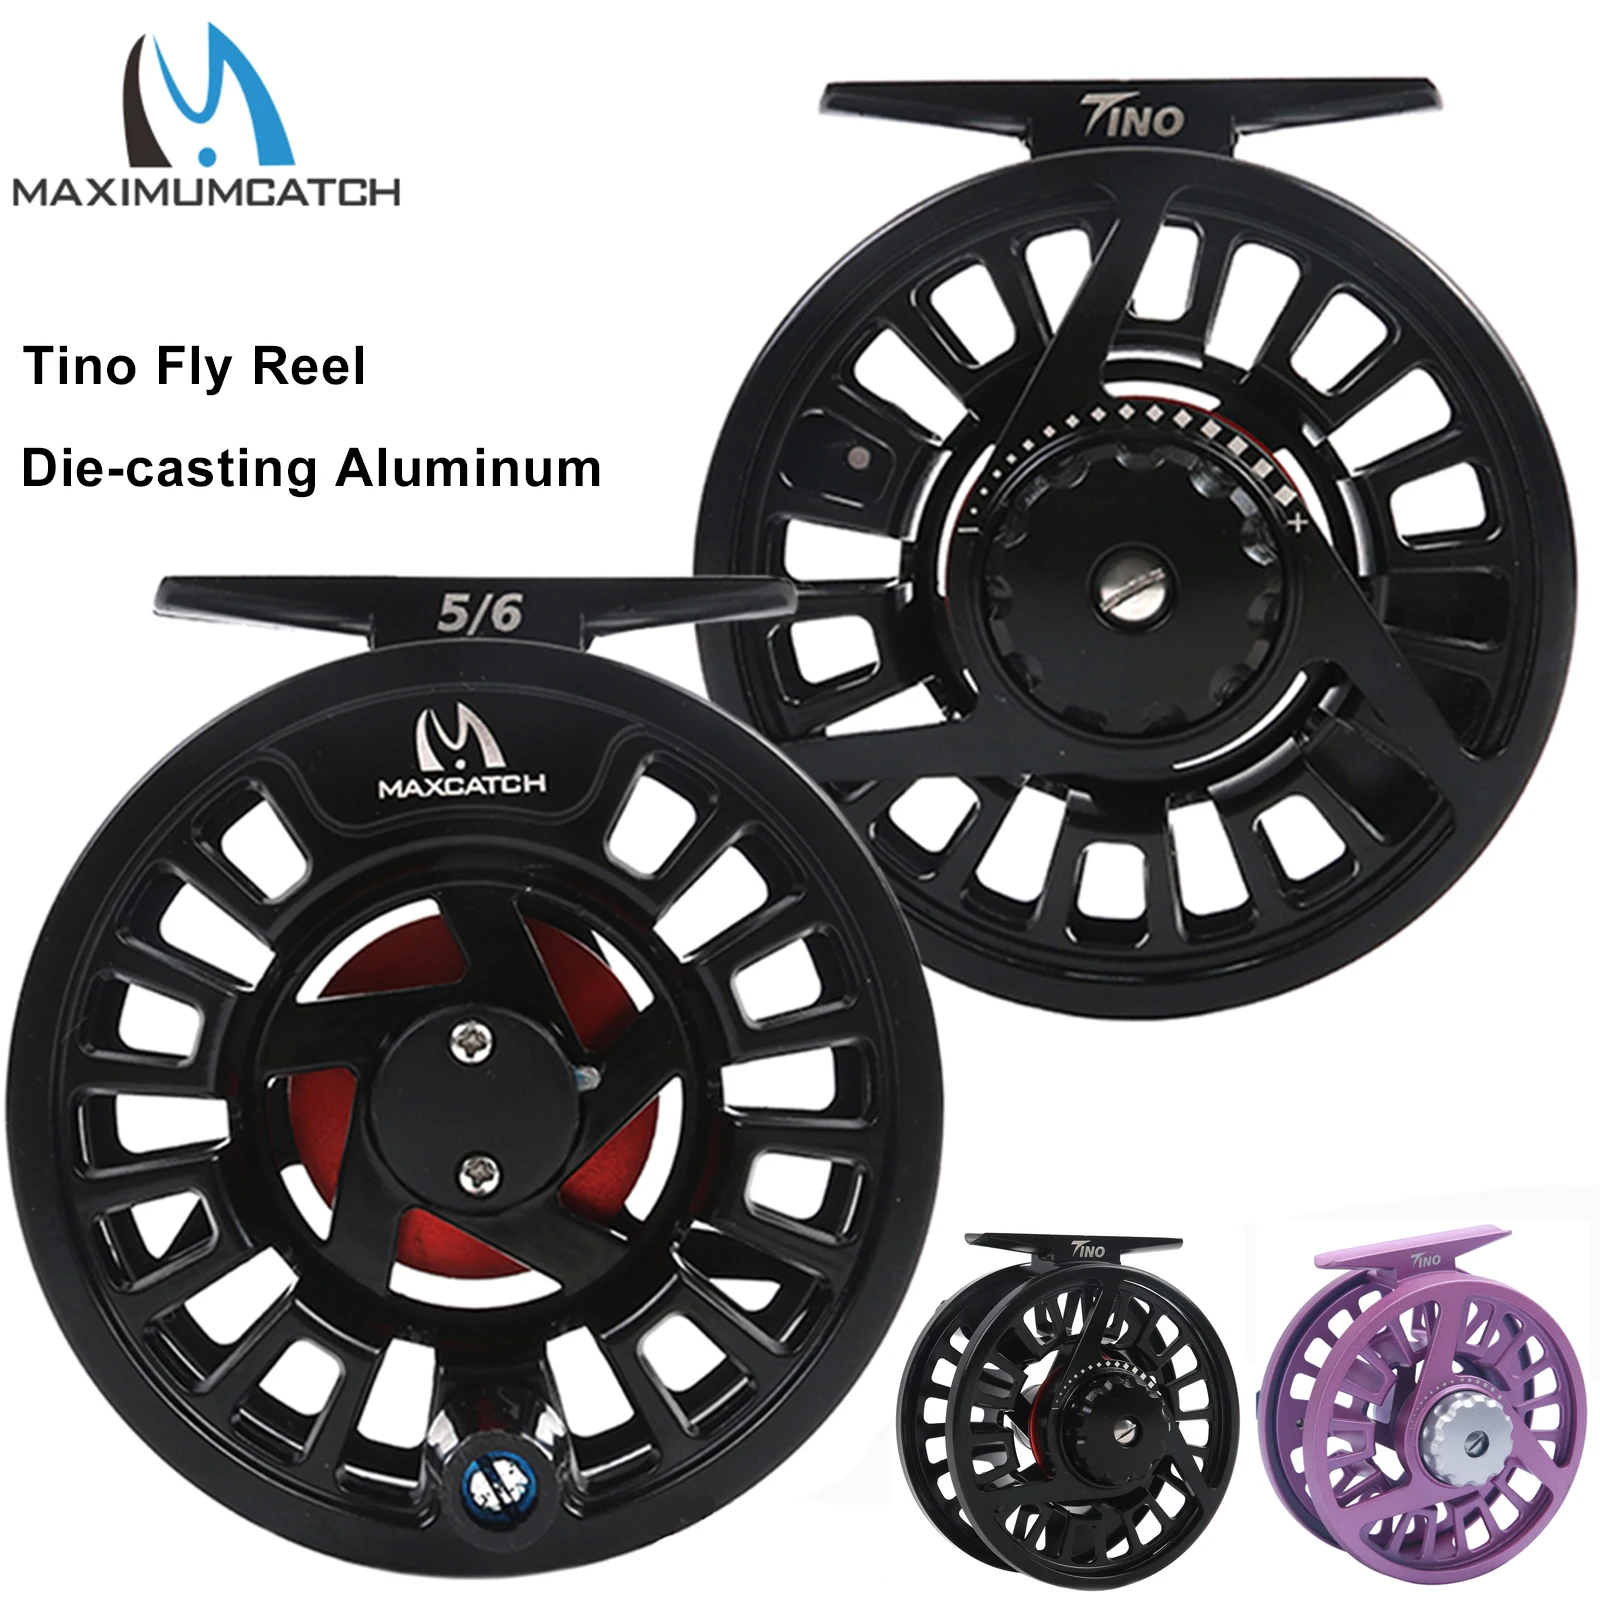 https://ae01.alicdn.com/kf/S4808ee62ceb447fe88c86f2ce718ee50X/Maximumcatch-Maxcatch-Die-casting-Aluminum-Fly-Fishing-Reel-Right-and-Left-Handed-3-8wt-Black-Color.jpg